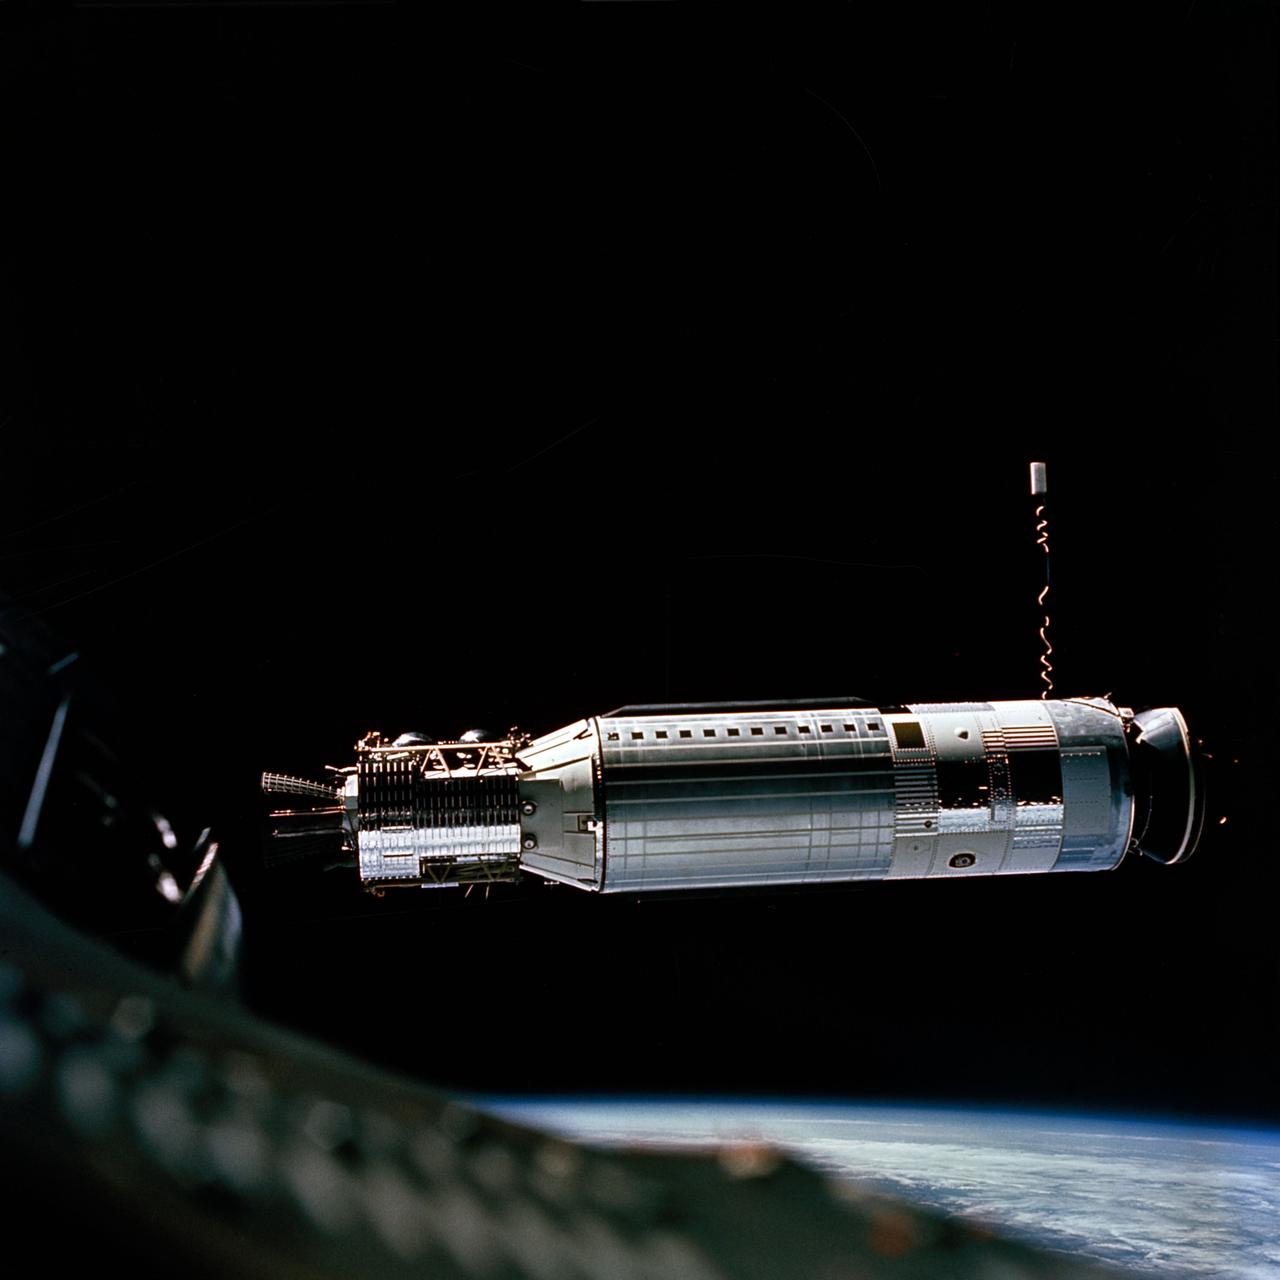 GEMINI 8 ARMSTRONG & SCOTT MISSION RECOVERY 8x10 SILVER HALIDE PHOTO PRINT 